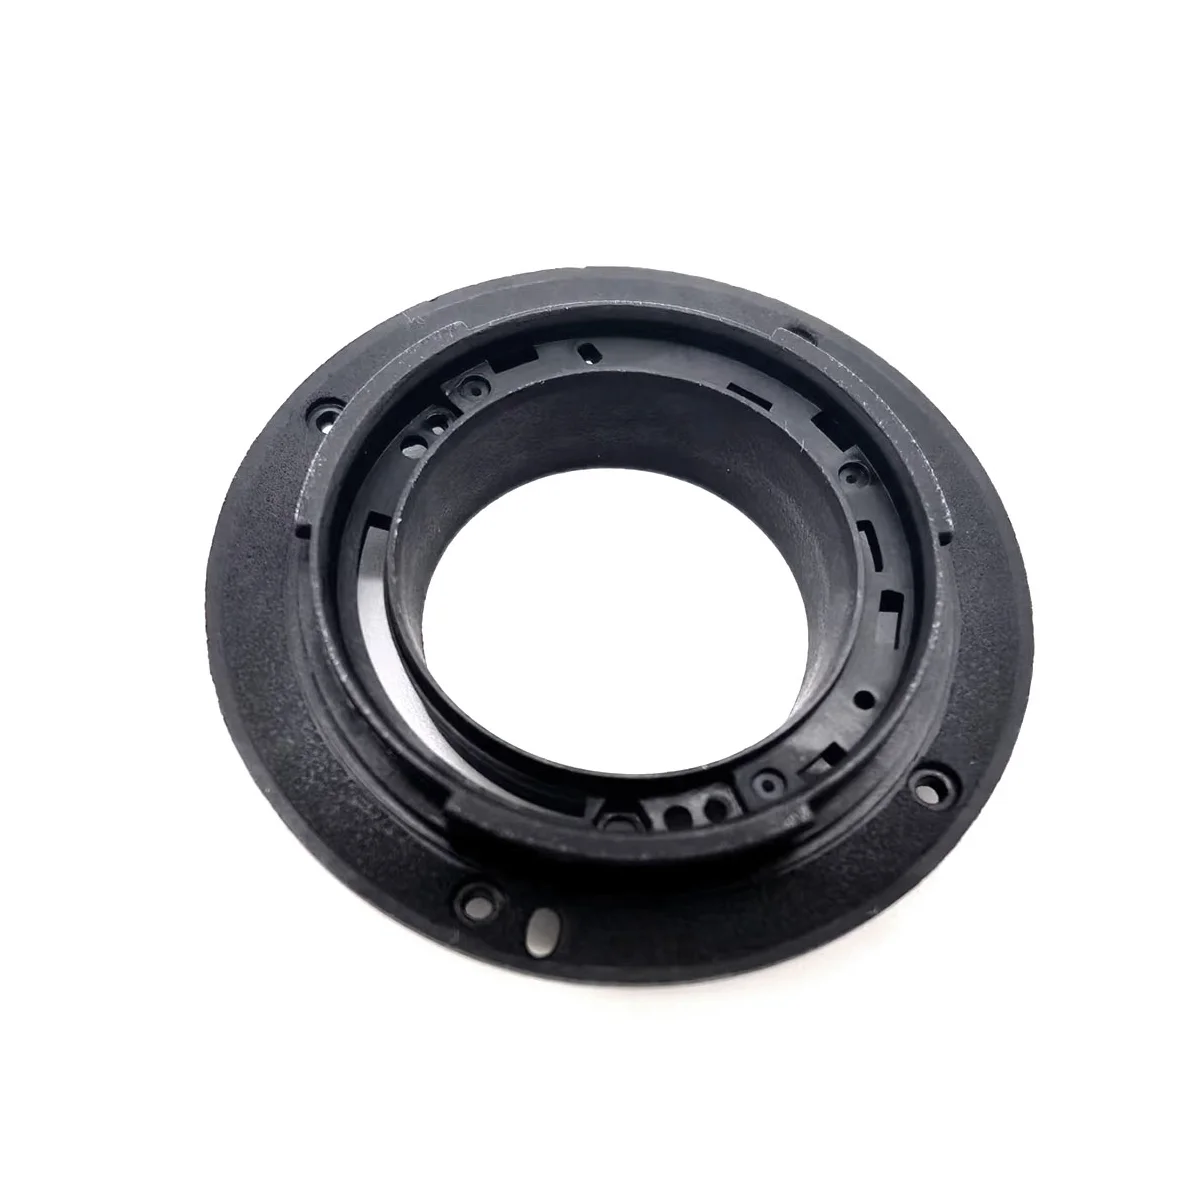 

1Pcs New Lens Bayonet Mount Ring for Fuji for Fujifilm 50-230Mm XC 16-50Mm F/3.5-5.6 OIS Repair Part(Without Cable)